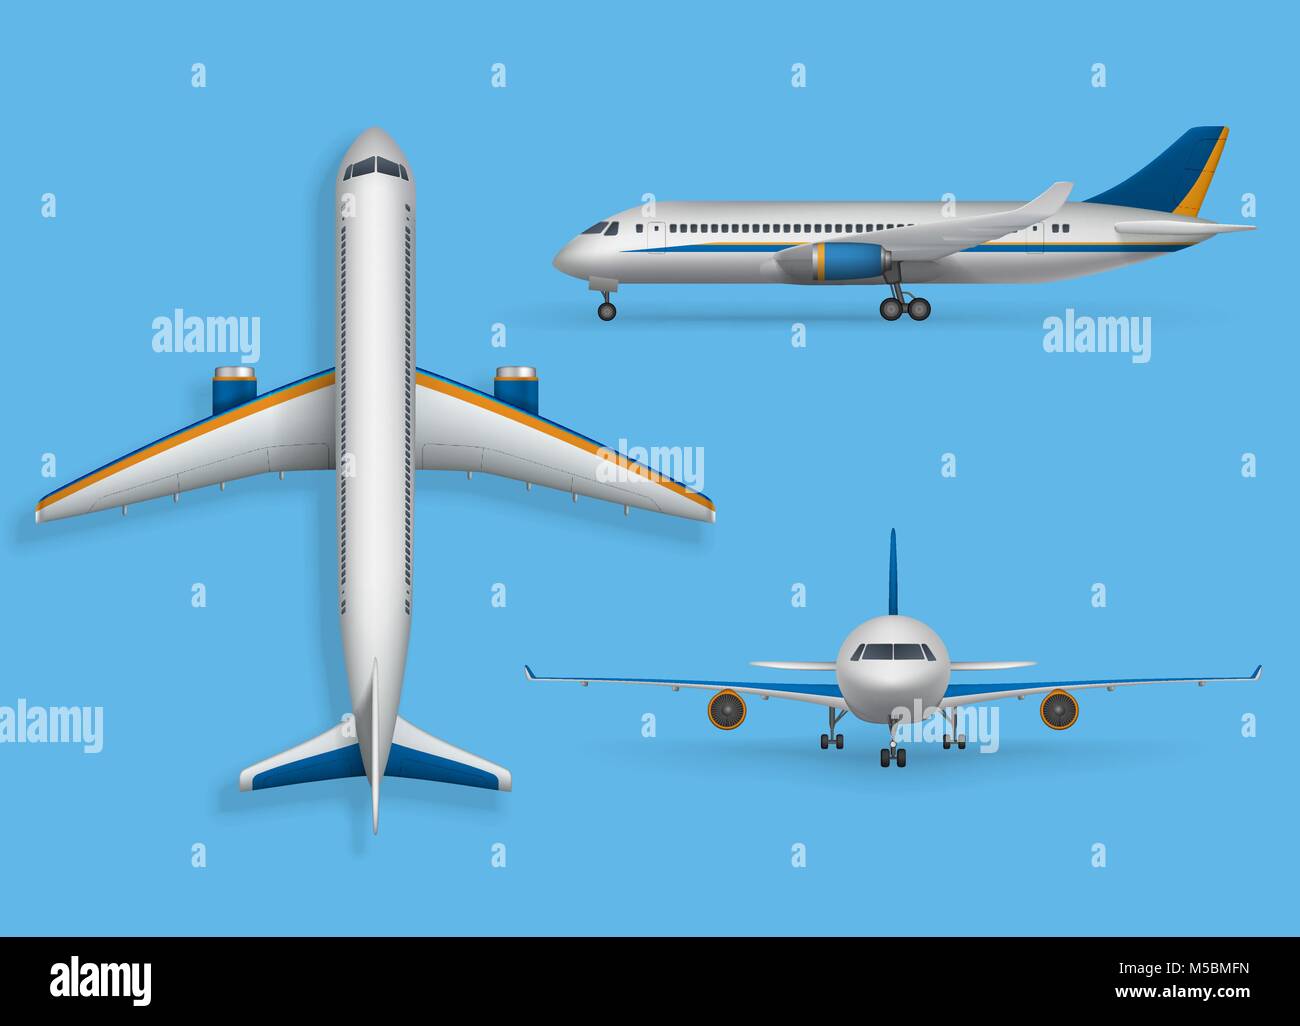 Download Realistic Passenger Airplane Mock Up Airliner In Top Side Front View Modern Aircraft Flight Isolated On Blue Background 3d Airplane Transport Design Vector Illustration Stock Vector Image Art Alamy